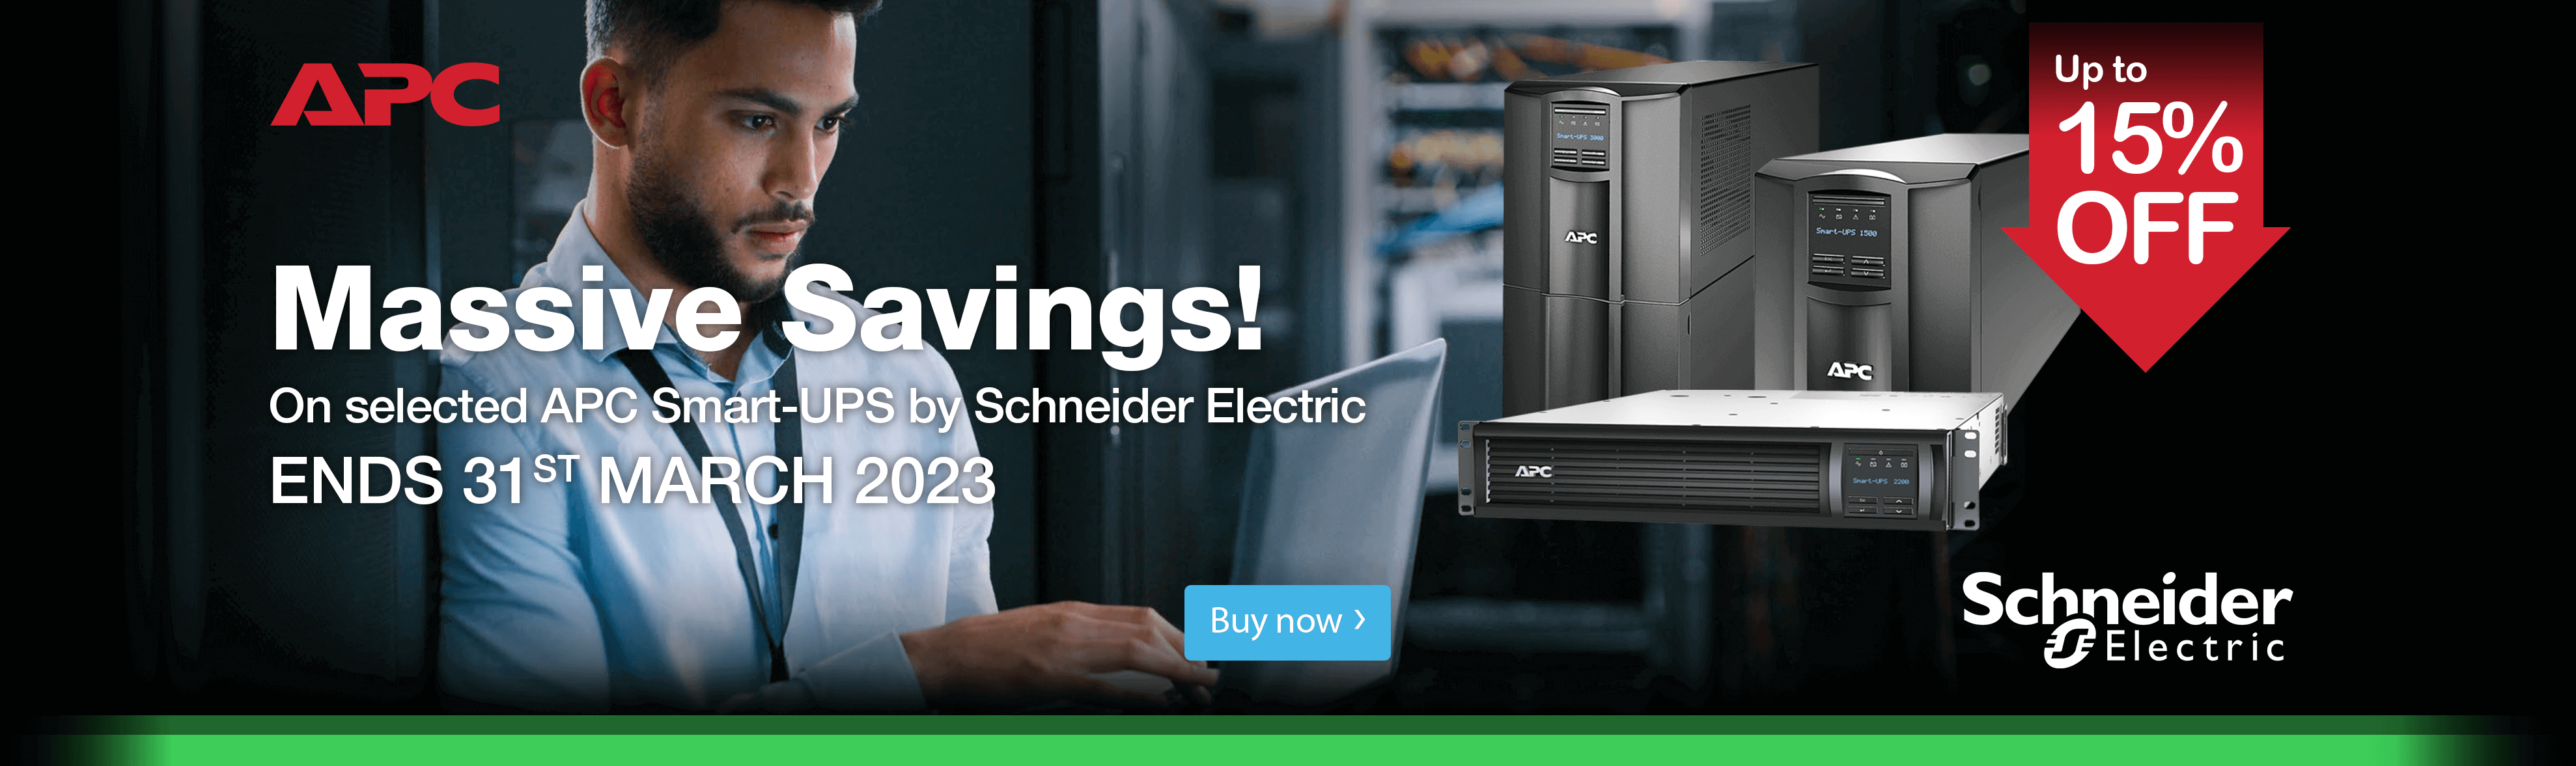 APC Schenider Electric - Up to 15% OFF - Massive Savings! On selected APC Smart-UPS by Schenider Electric. Ends 31st March 2023. Buy now.